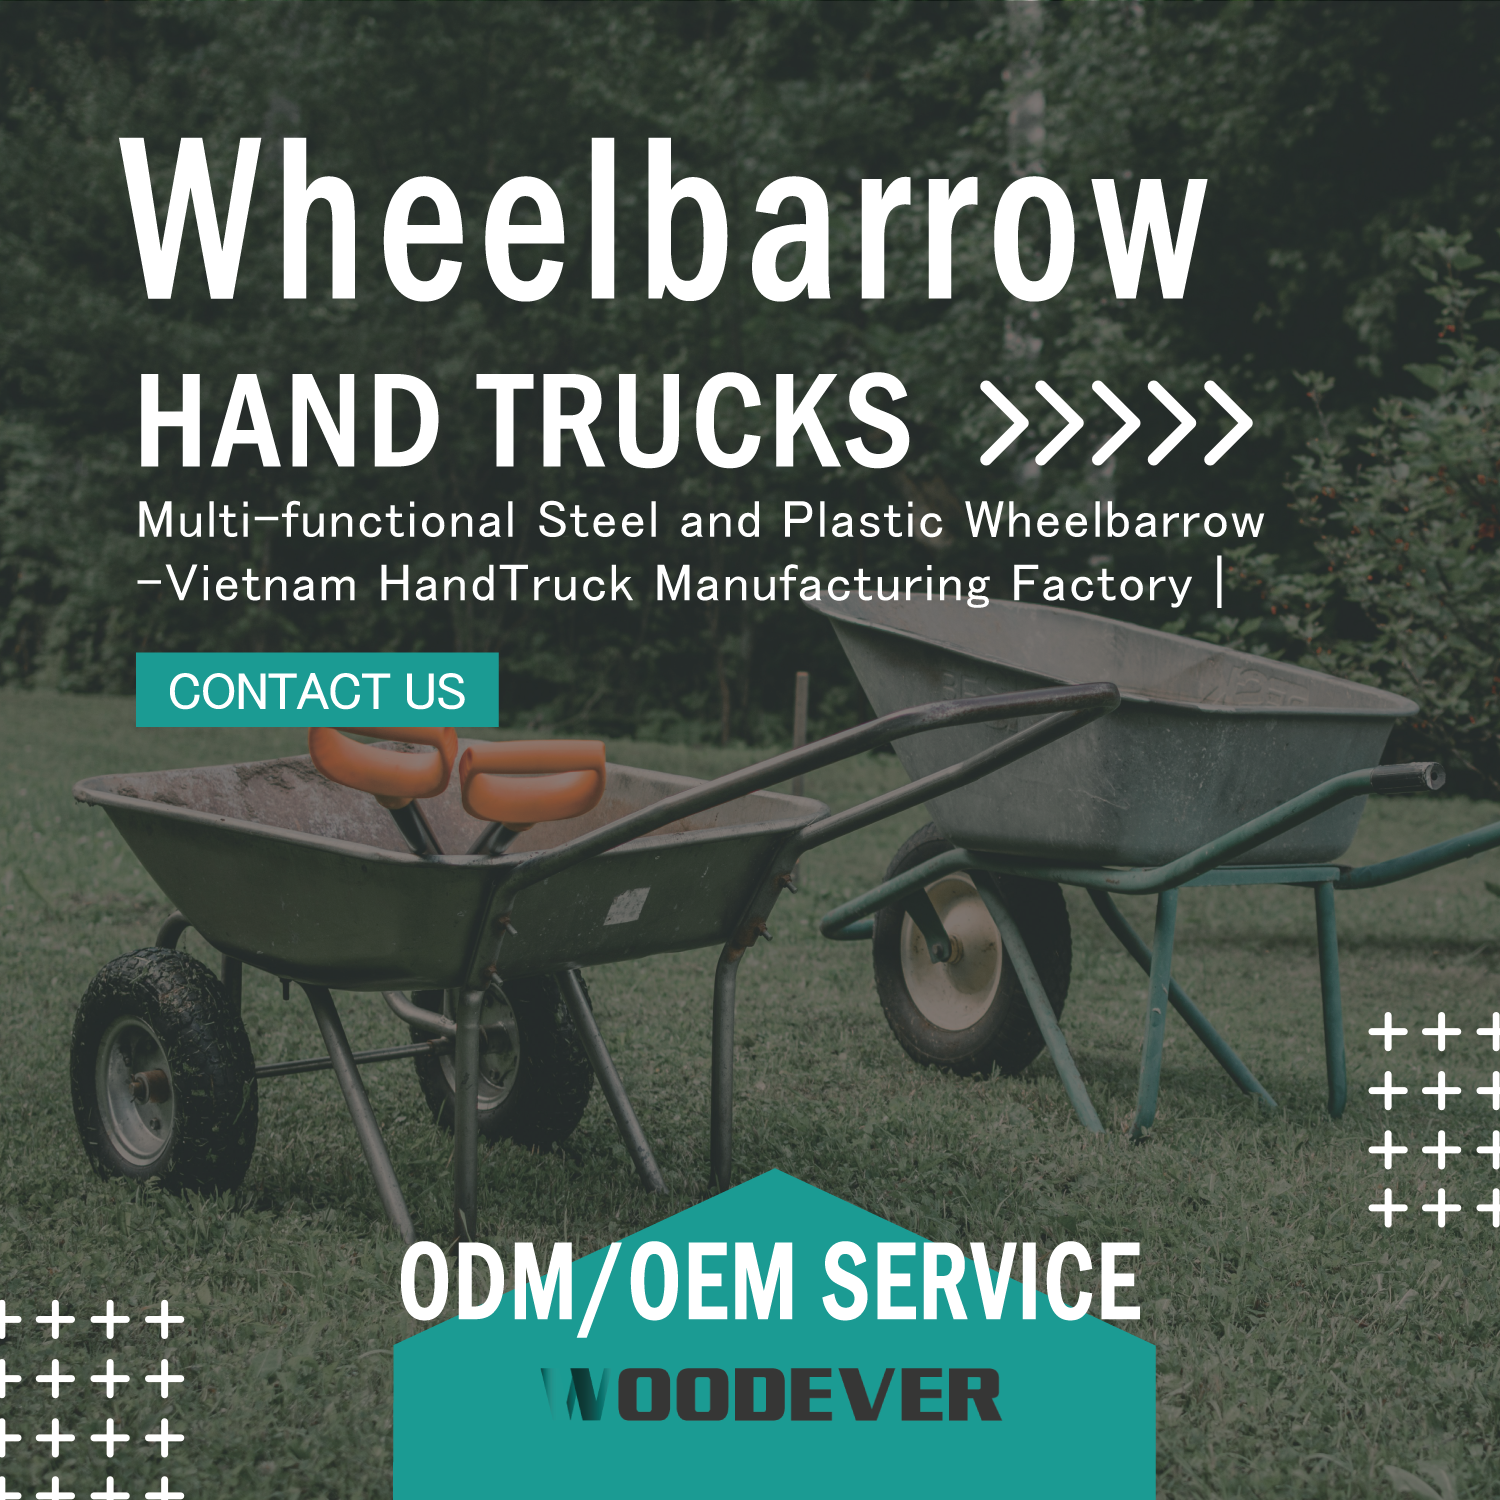 WOODEVER wheelbarrow specialized in manufacturing factories in Vietnam and China, providing high quality wheelbarrows to global B2B trolley hand truck hardware industrial garden buyers, with high flexibility of customized OEM and ODM services, suitable for general daily household and construction site logistics use.